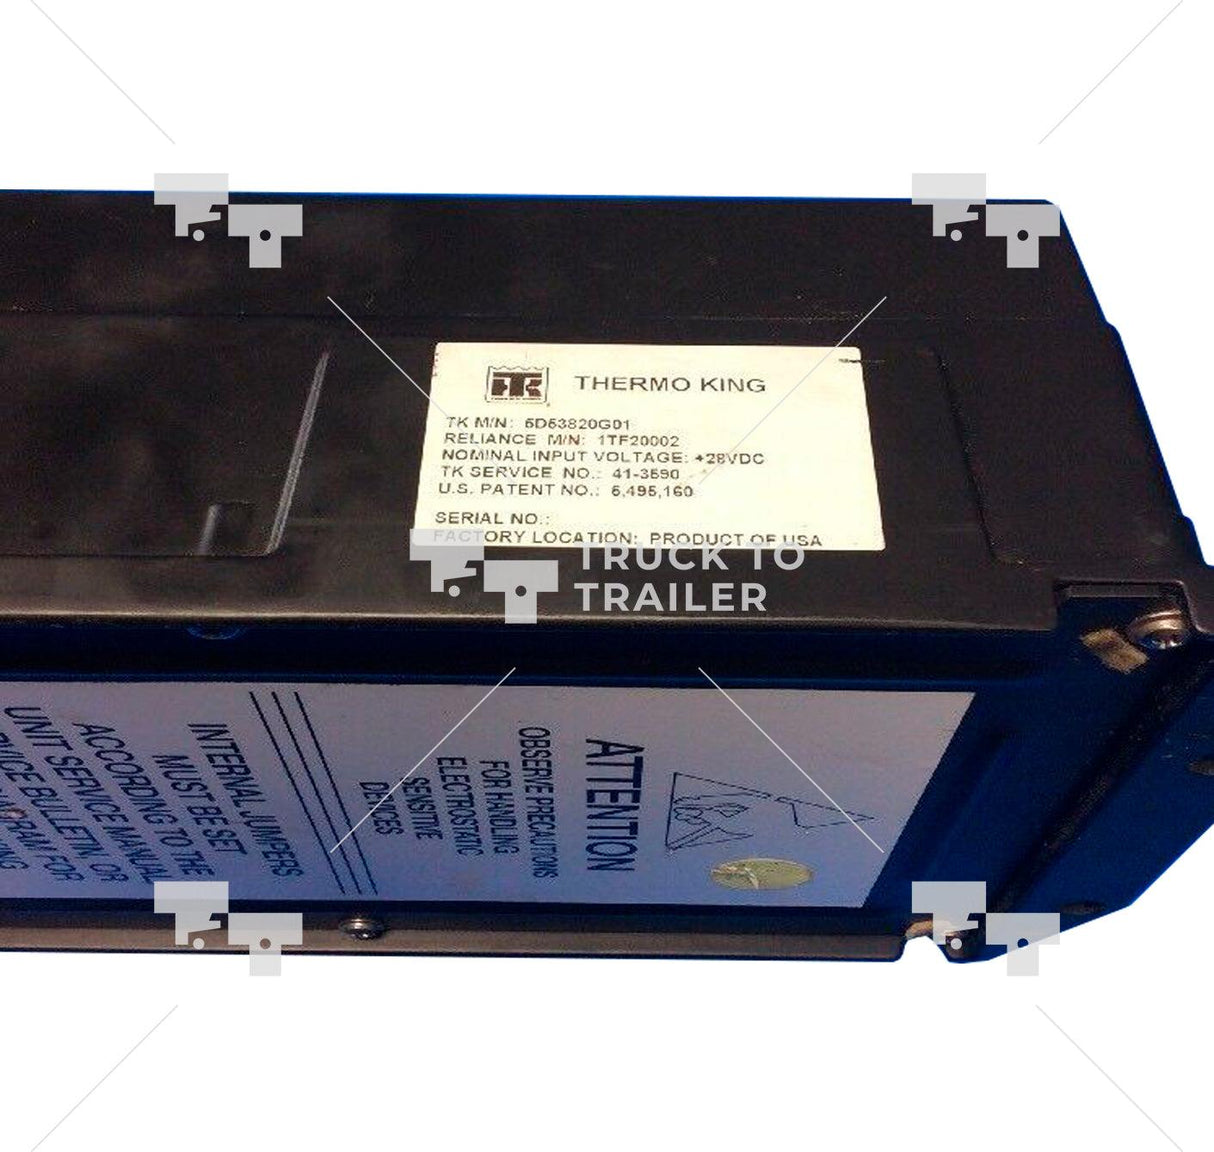 423794 Genuine Thermo King Ecu Motor Controller - Truck To Trailer